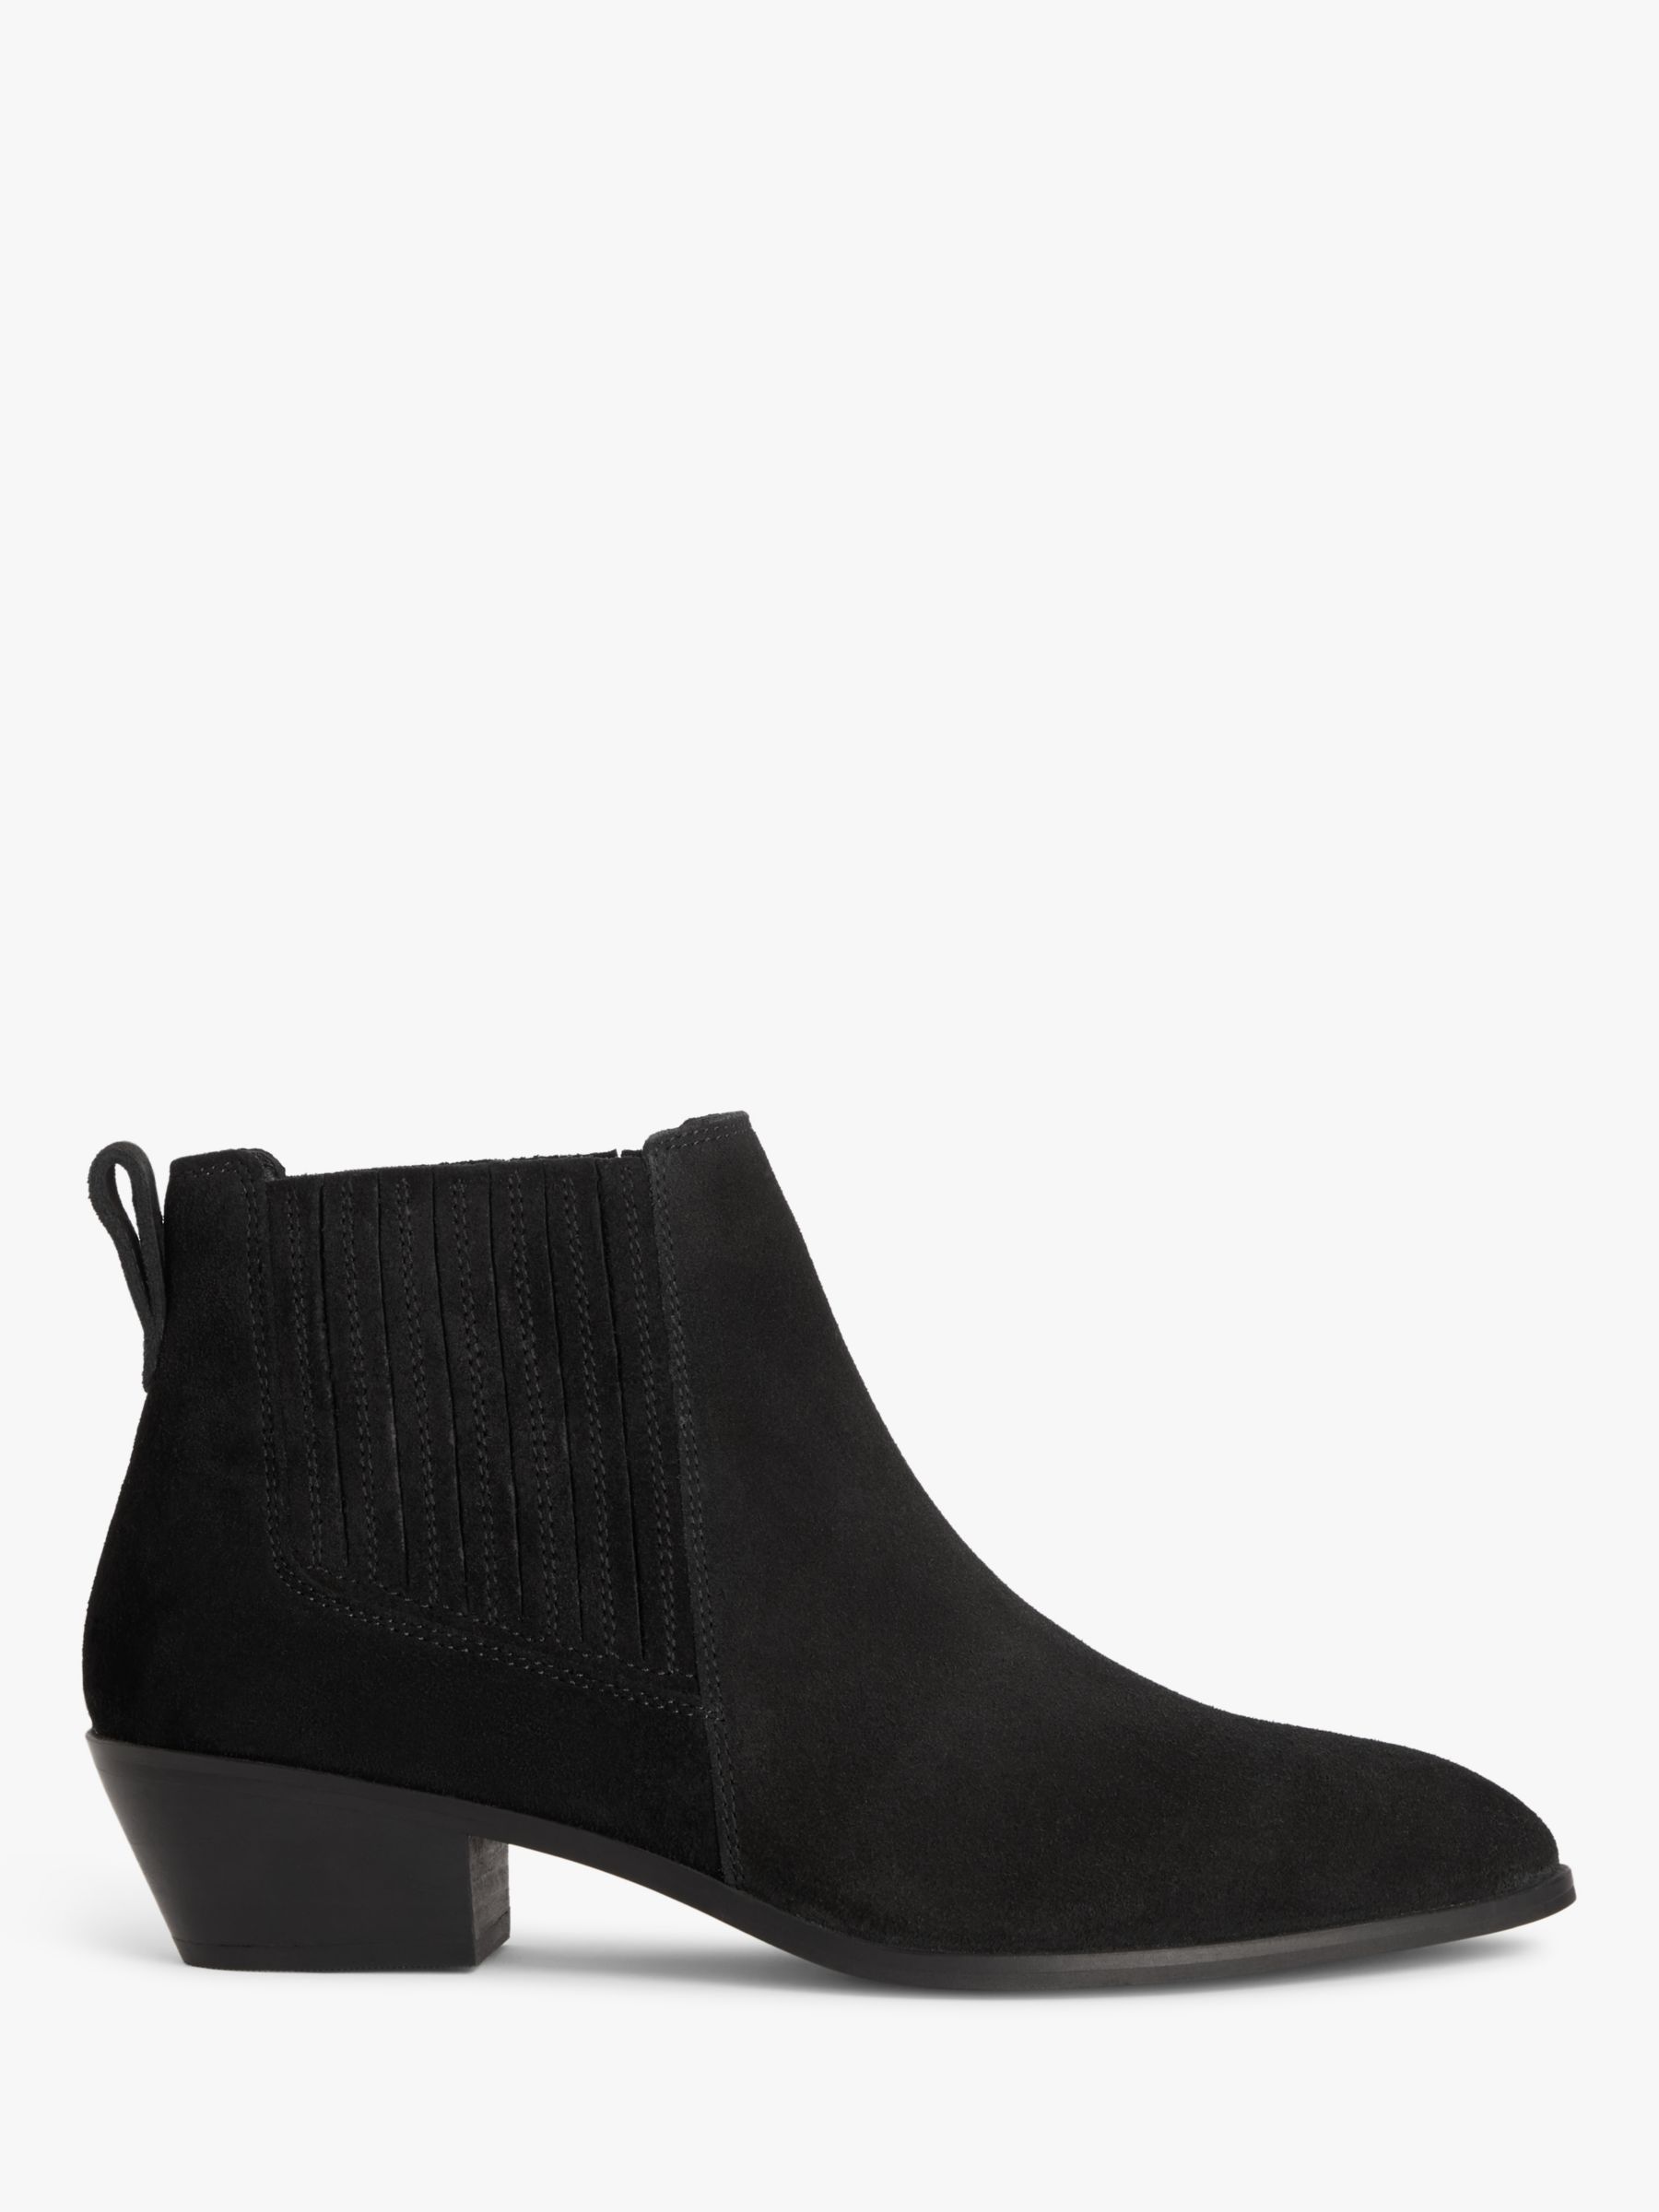 Black Booties - Black Ankle Booties - Boots For Women - Lulus